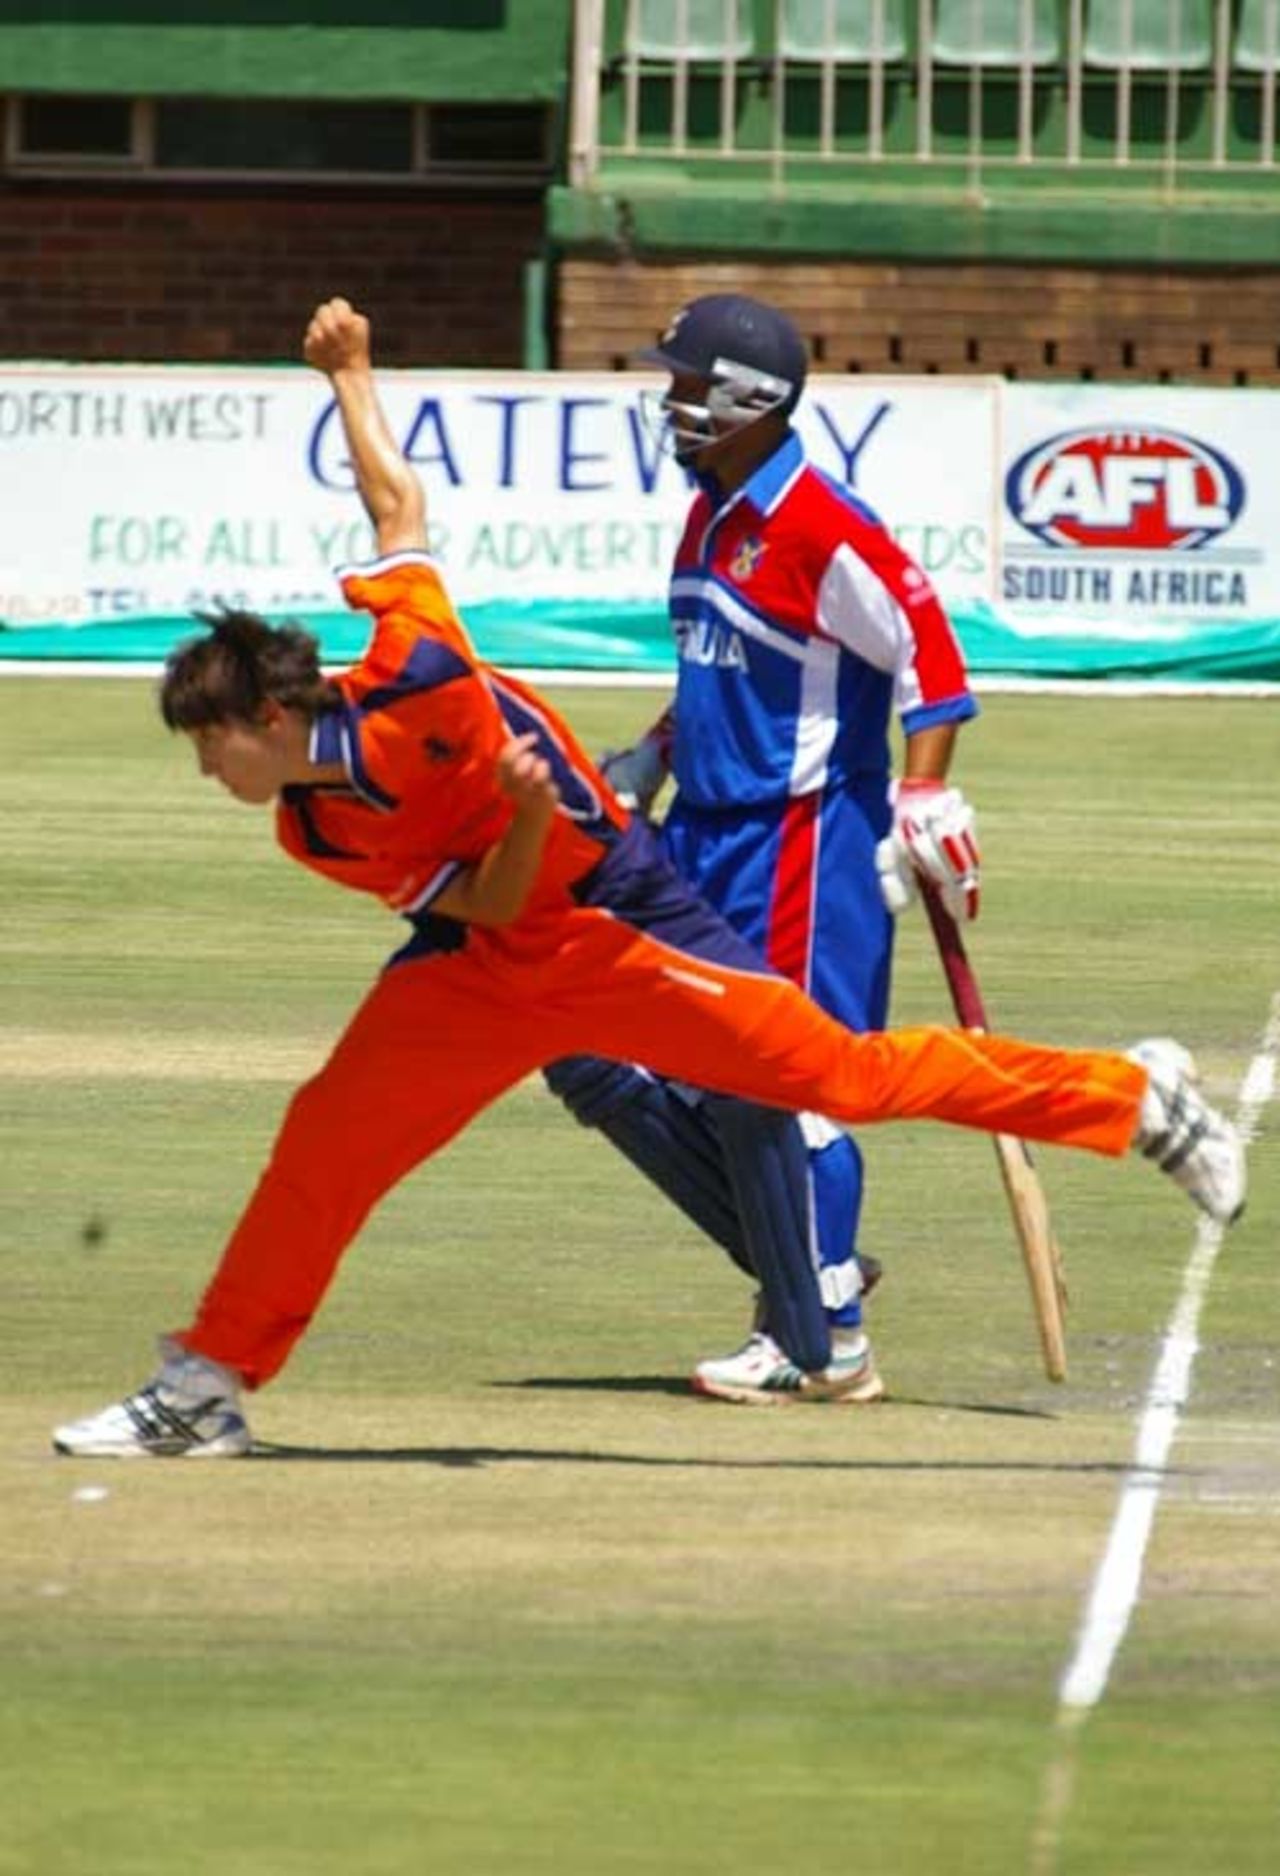 Mark Jonkman took two early wickets for Netherlands to put Bermuda on the back foot, Netherlands v Bermuda, Tri-series, Potchefstroom, November 29, 2006